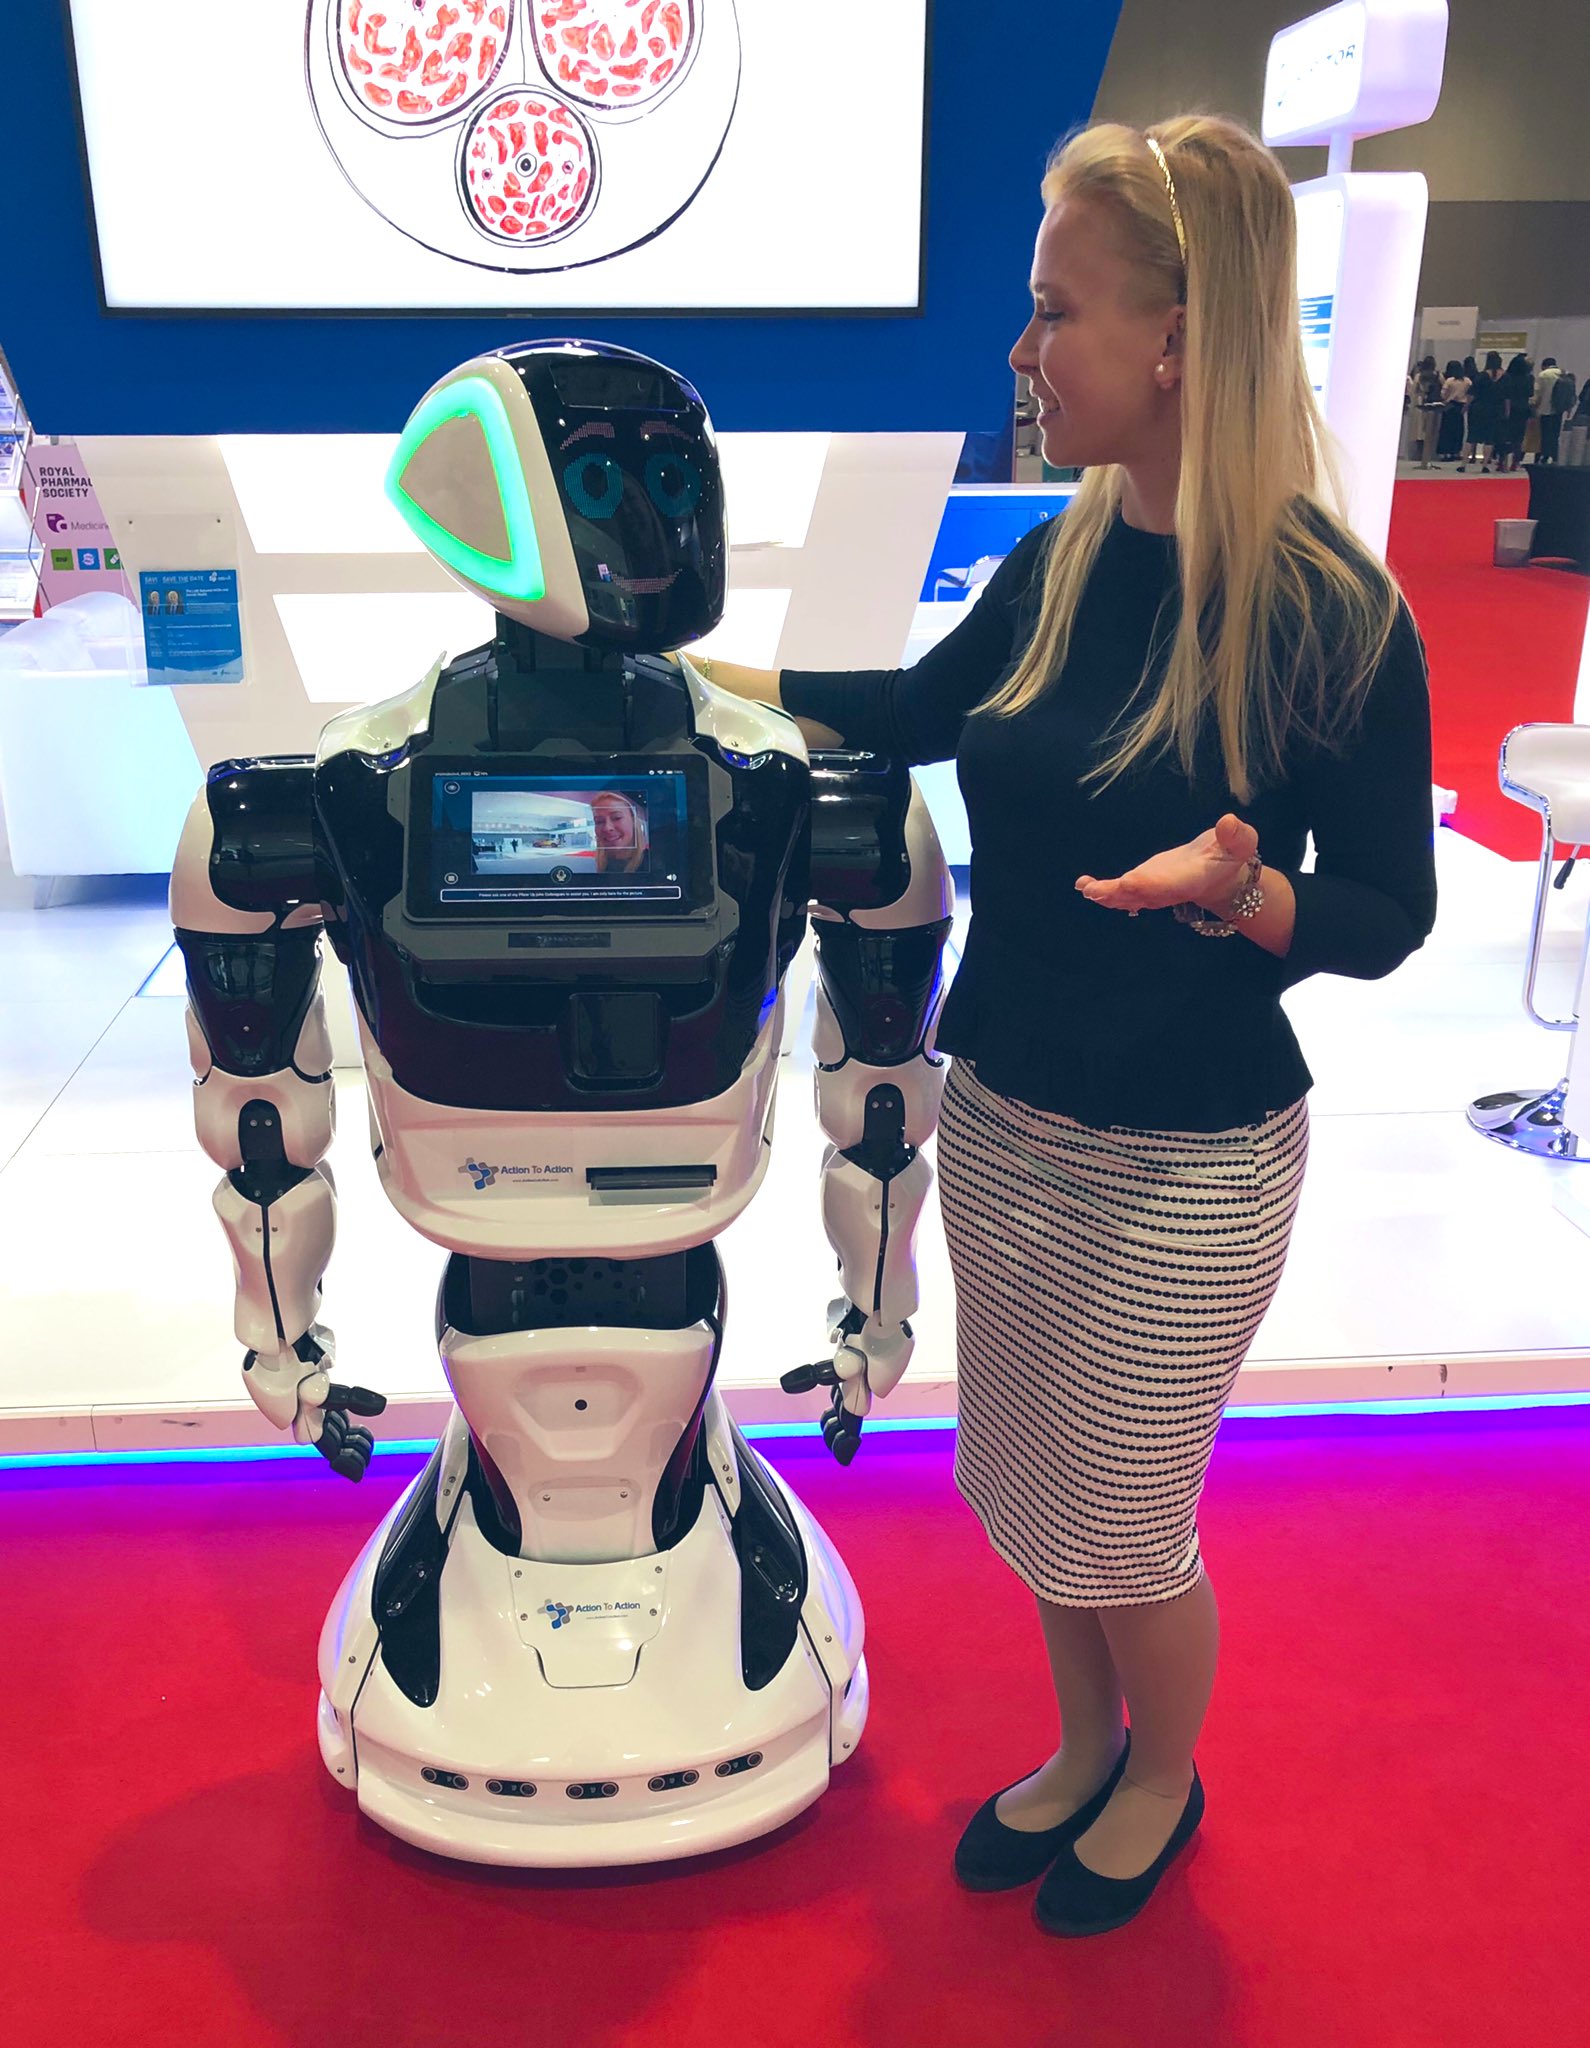 sandaler sponsor Prestigefyldte Zuzana Kusynova on Twitter: "My first conversation with a robot!His name is  Willy and he said “he is here just for a picture” :-) he opened the  Congress #FIP2019 which is about